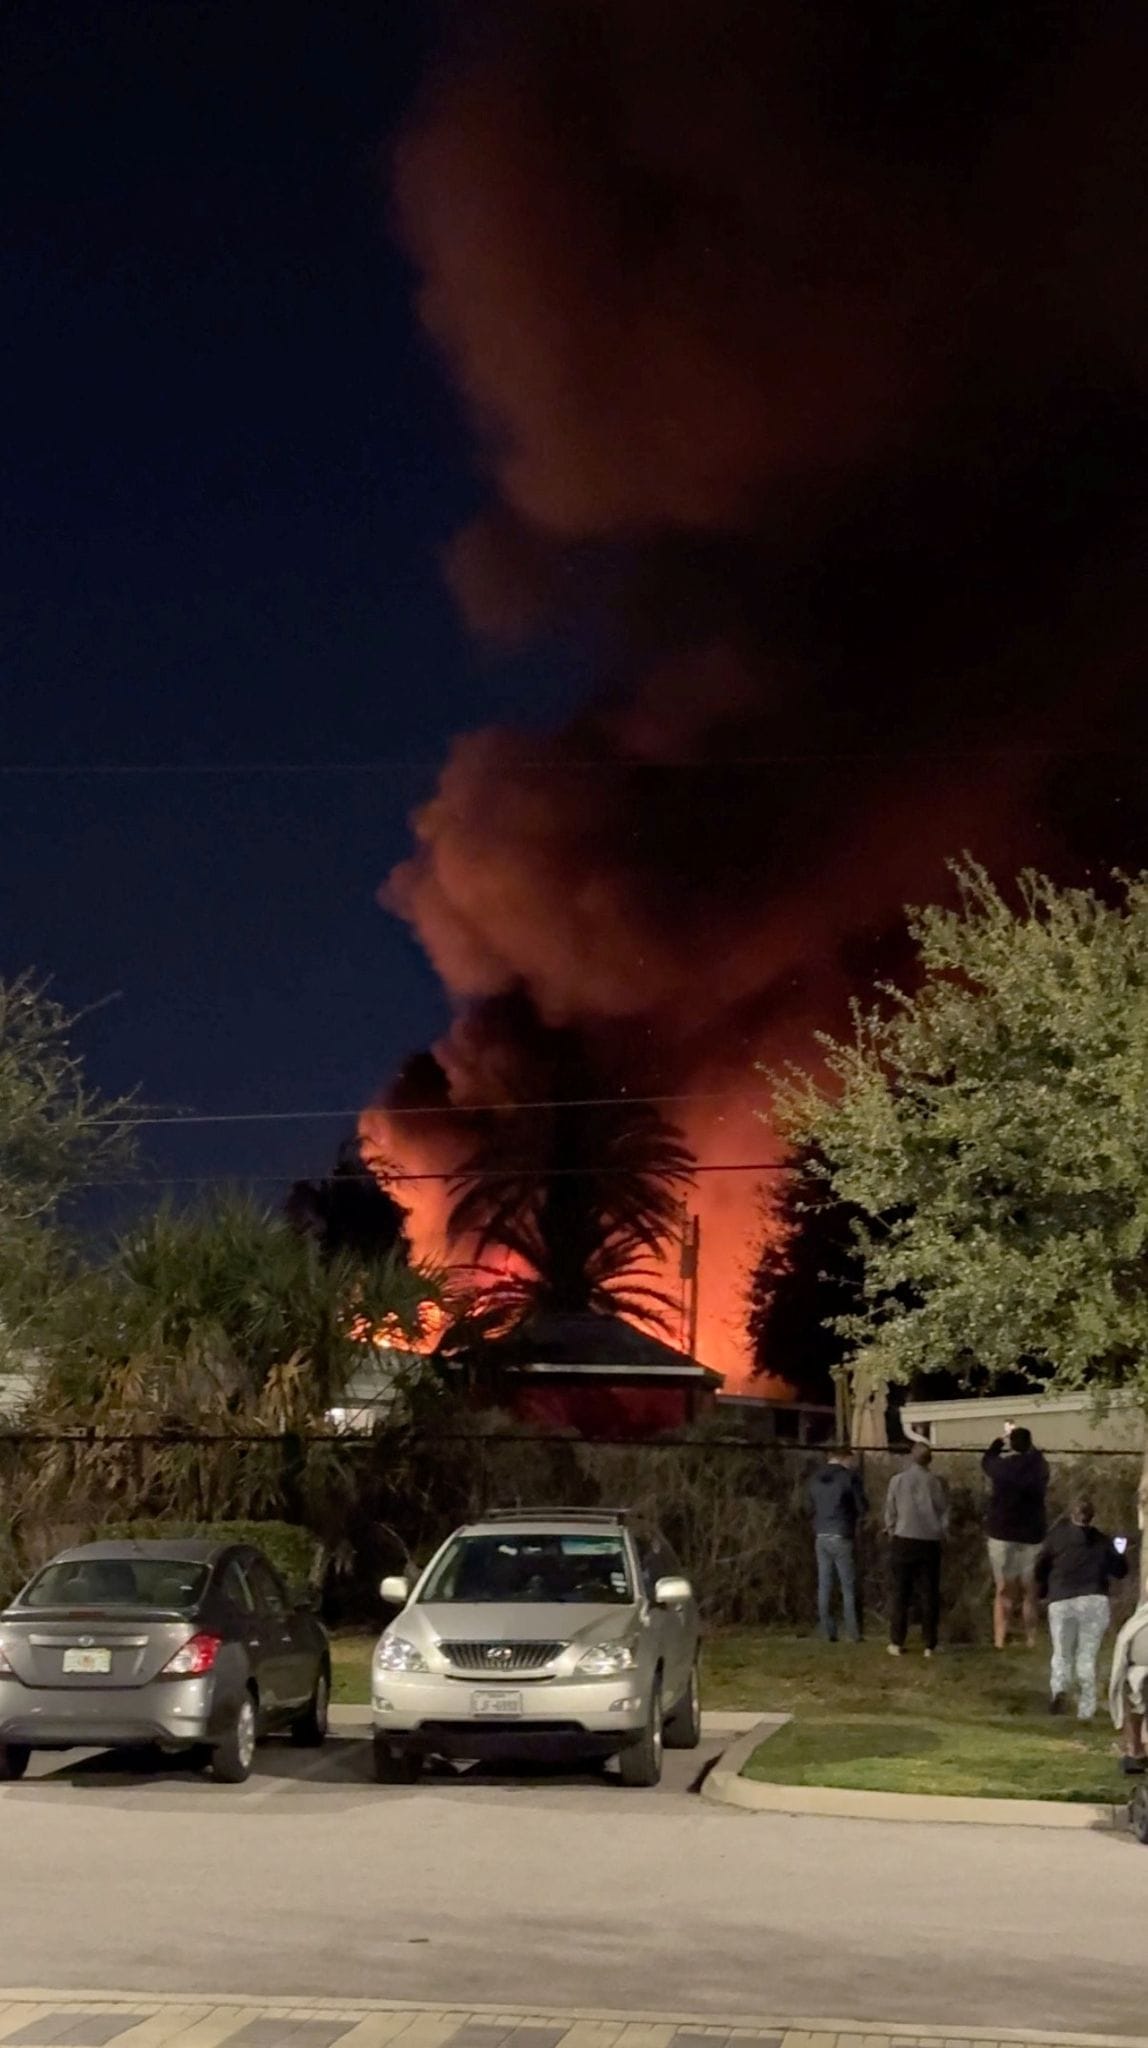 A plume of smoke rises after a small plane crashes in a trailer park in Clearwater, Florida